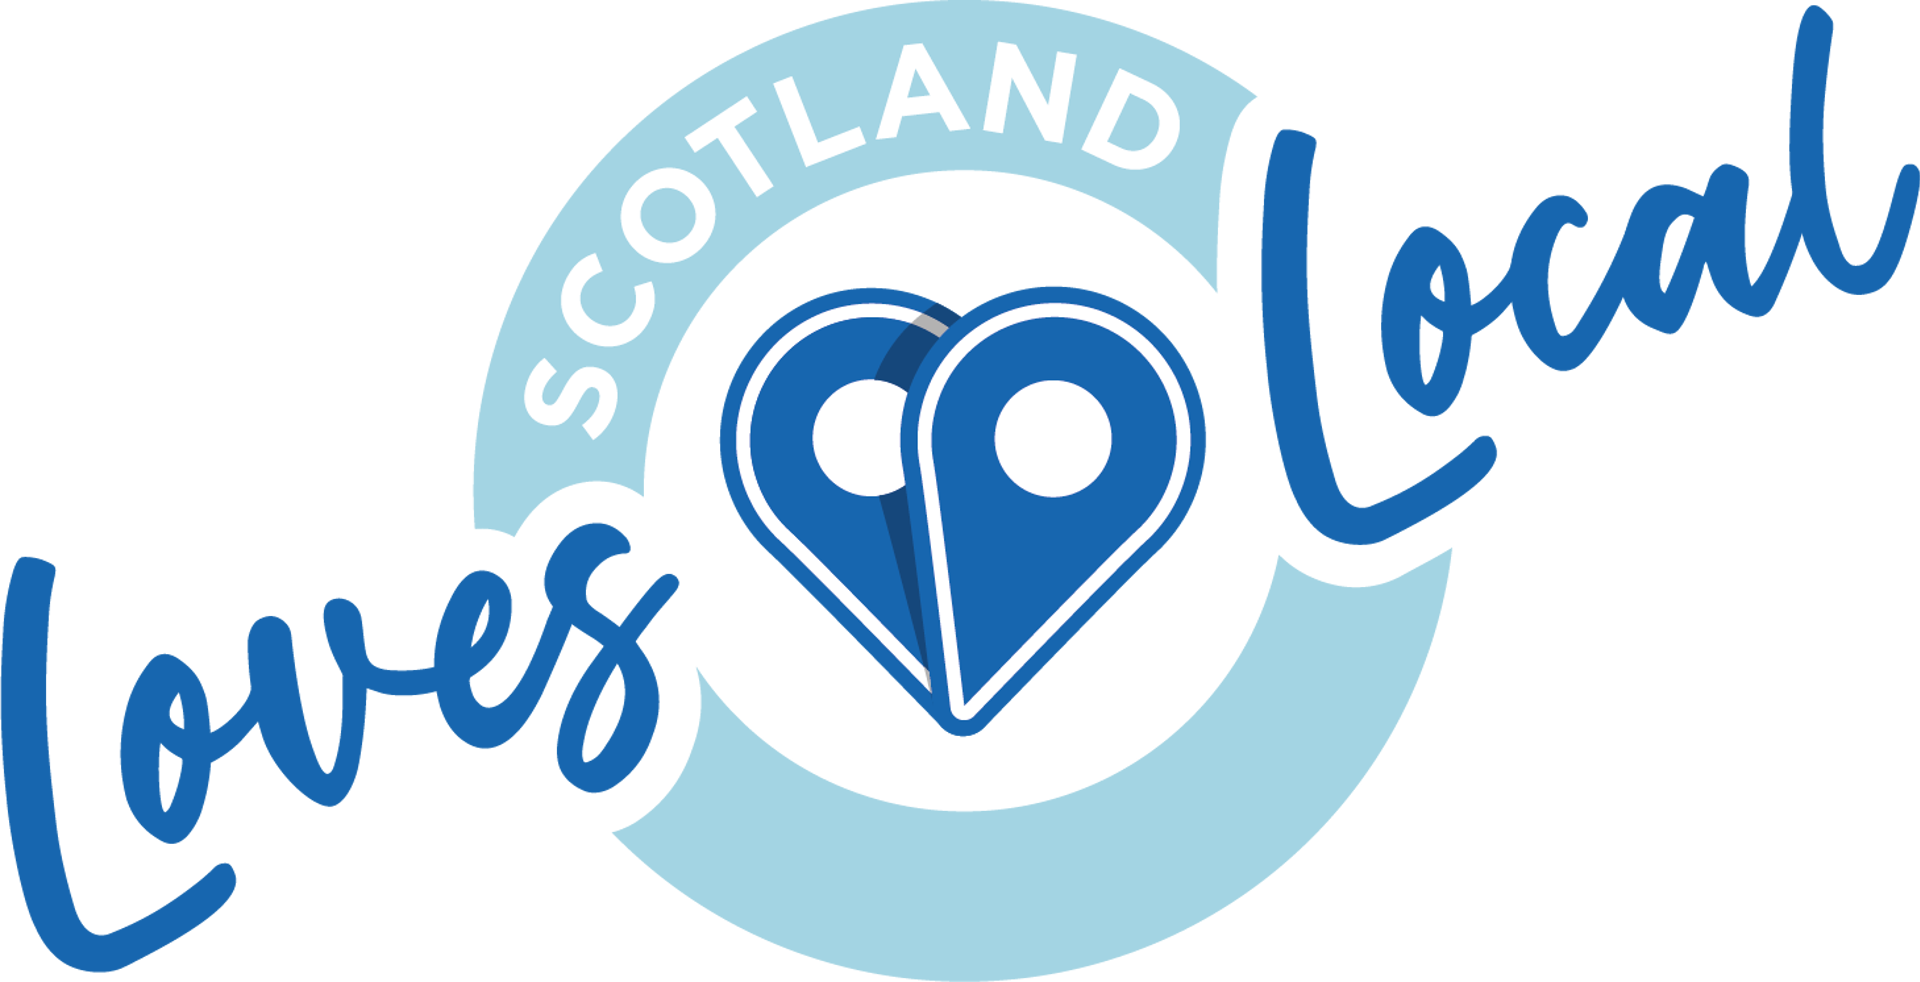 Background image - Scotland Loves Local